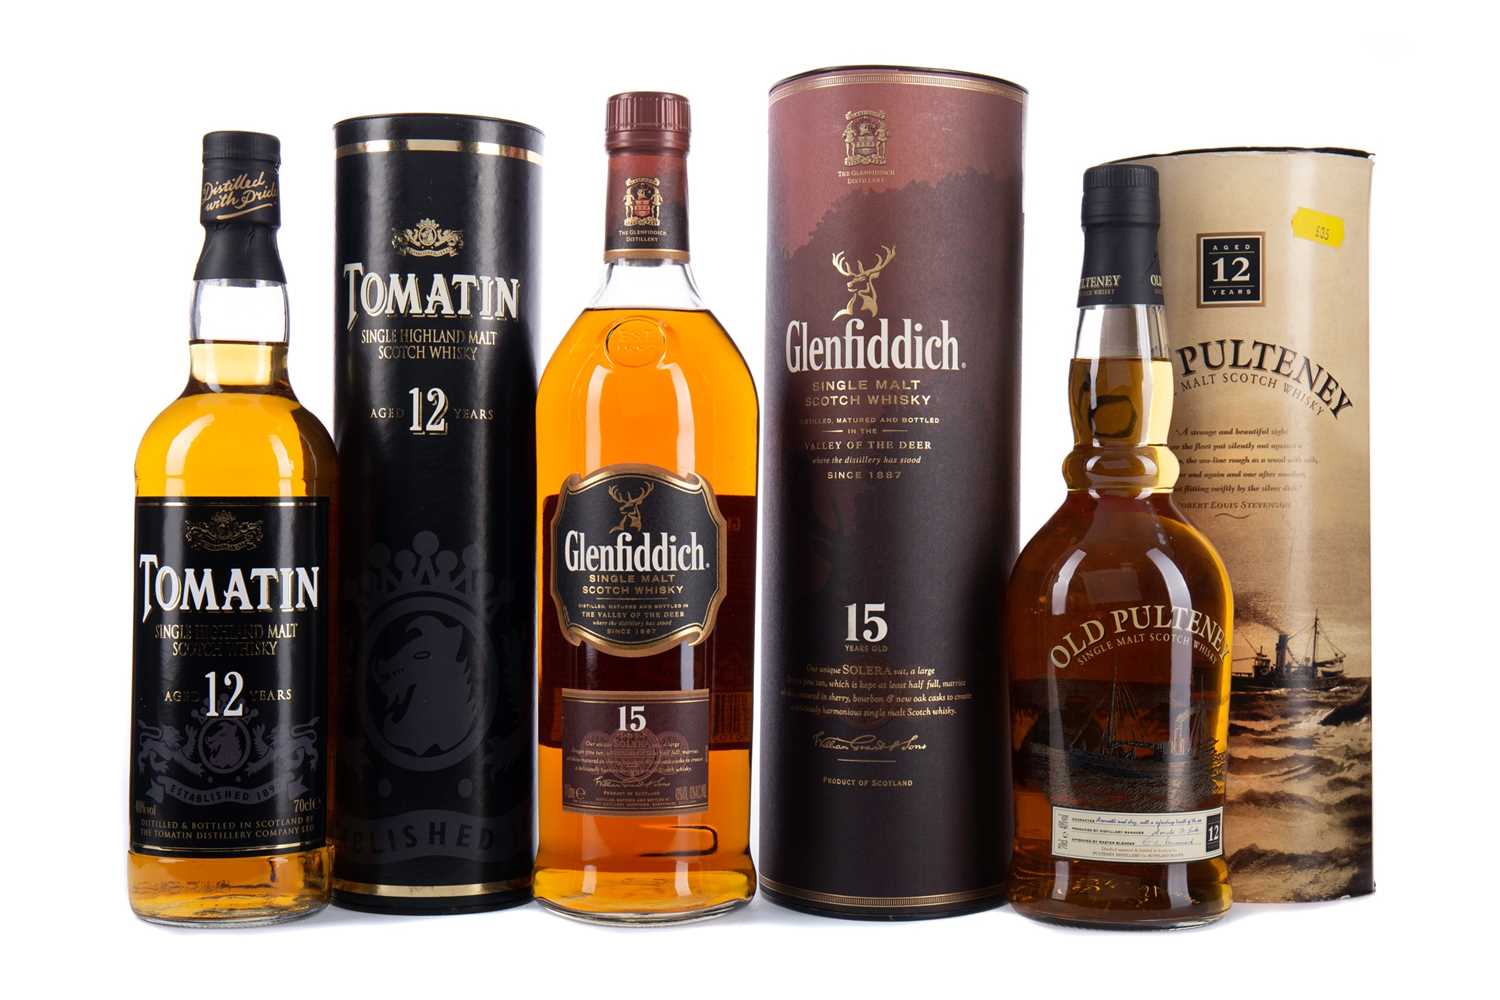 Lot 194 - GLENFIDDICH 15 YEARS OLD, OLD PULTENEY 12 YEARS OLD AND TOMATIN AGED 12 YEARS